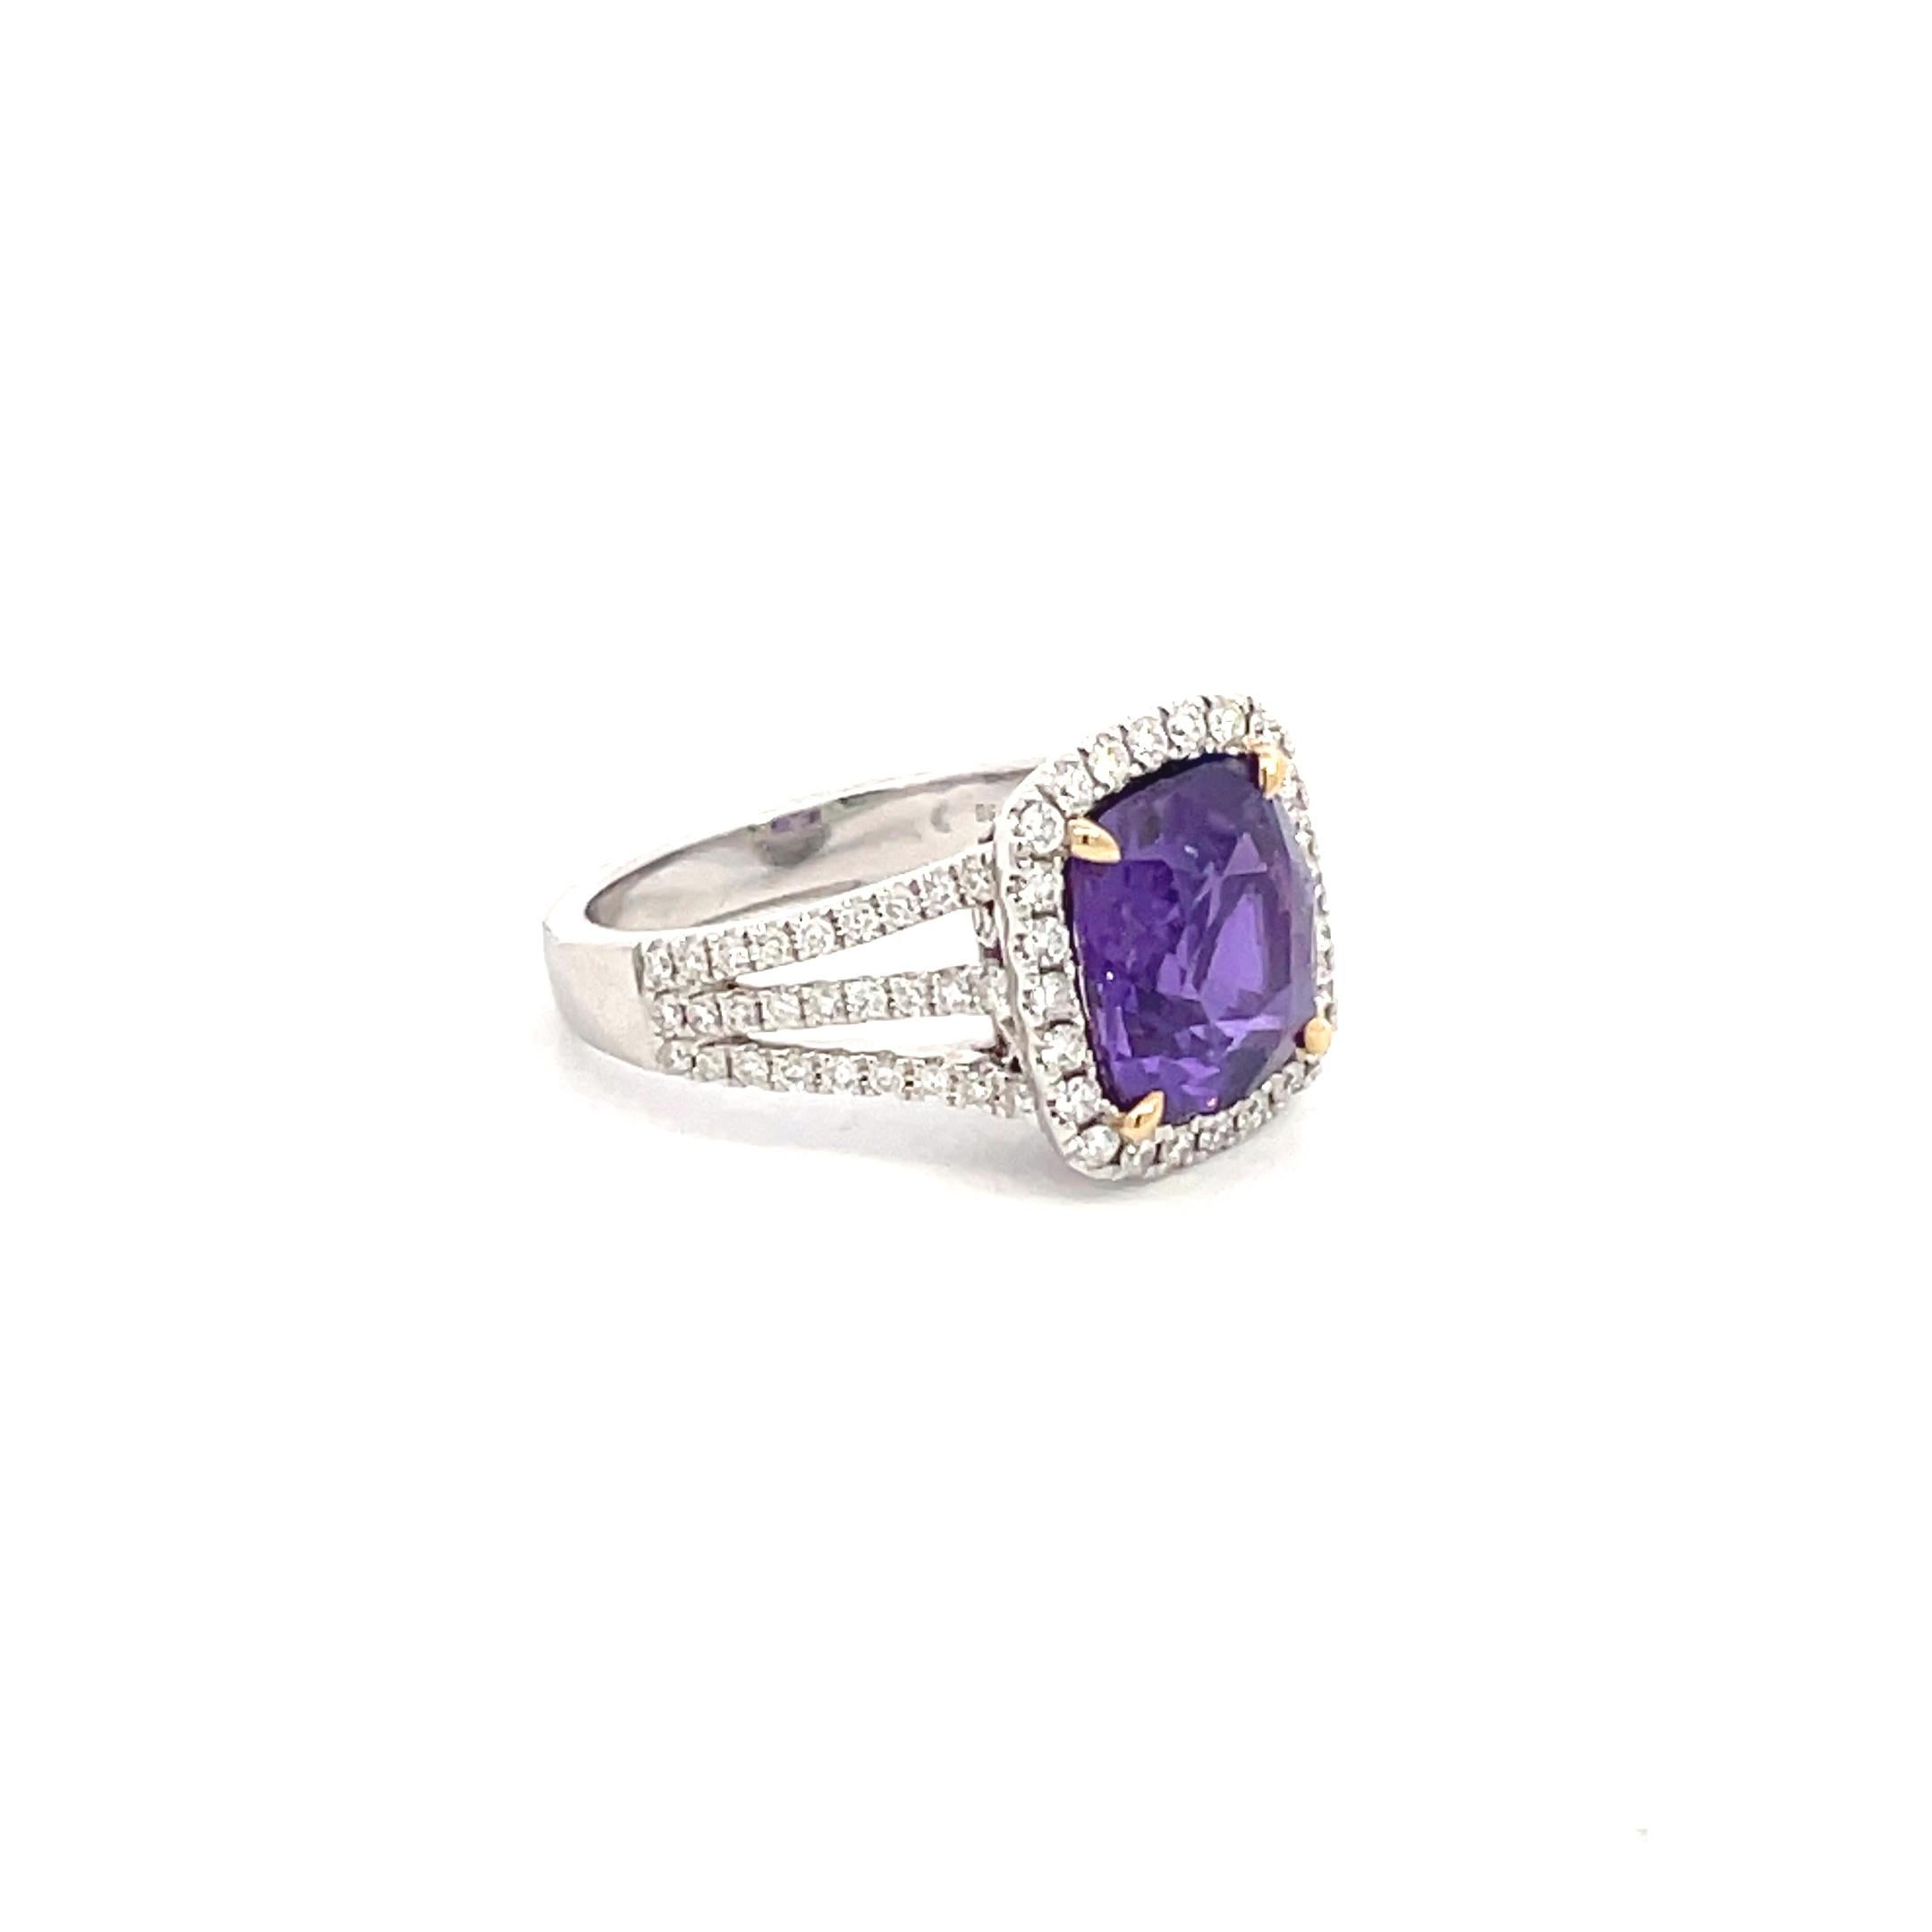 GAL Certified Natural No Heat 4.59 Carat Purple Sapphire and Diamond Ring For Sale 1